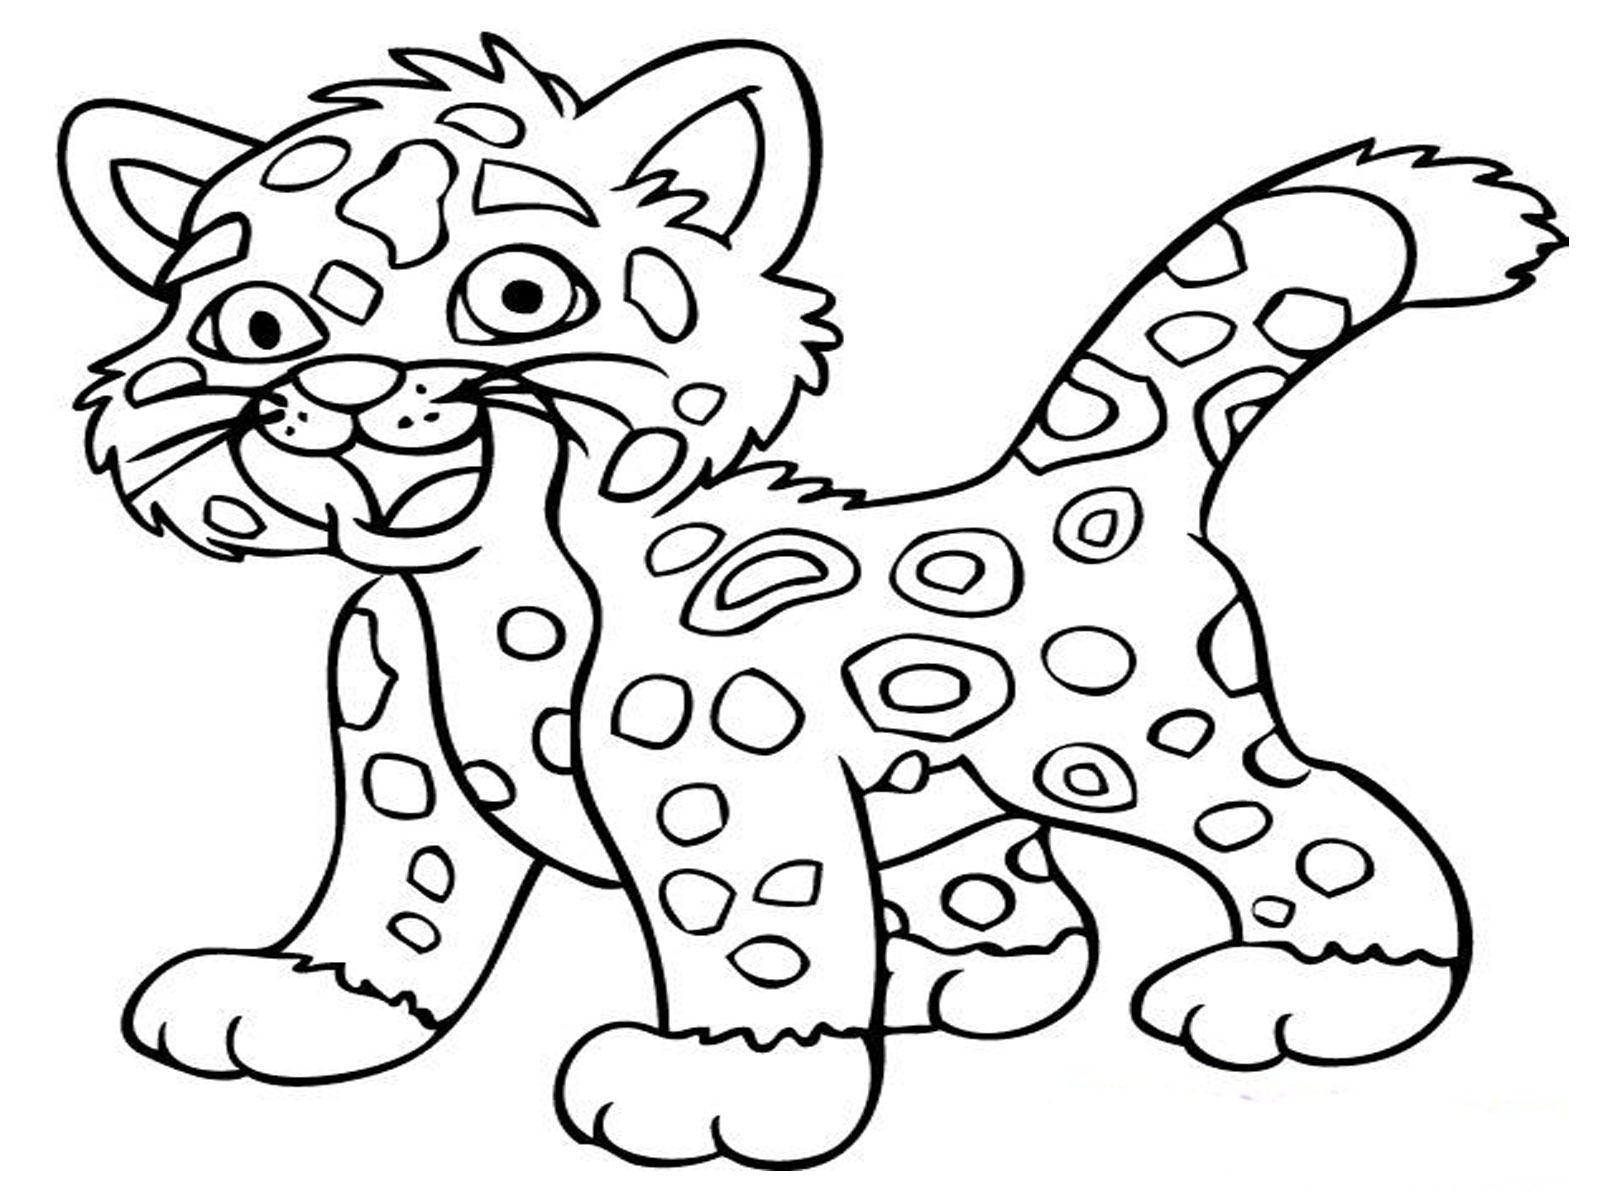 New Coloring Book Pages Of Animals Nice Design #30520 - Free Coloring Pages Animals Printable